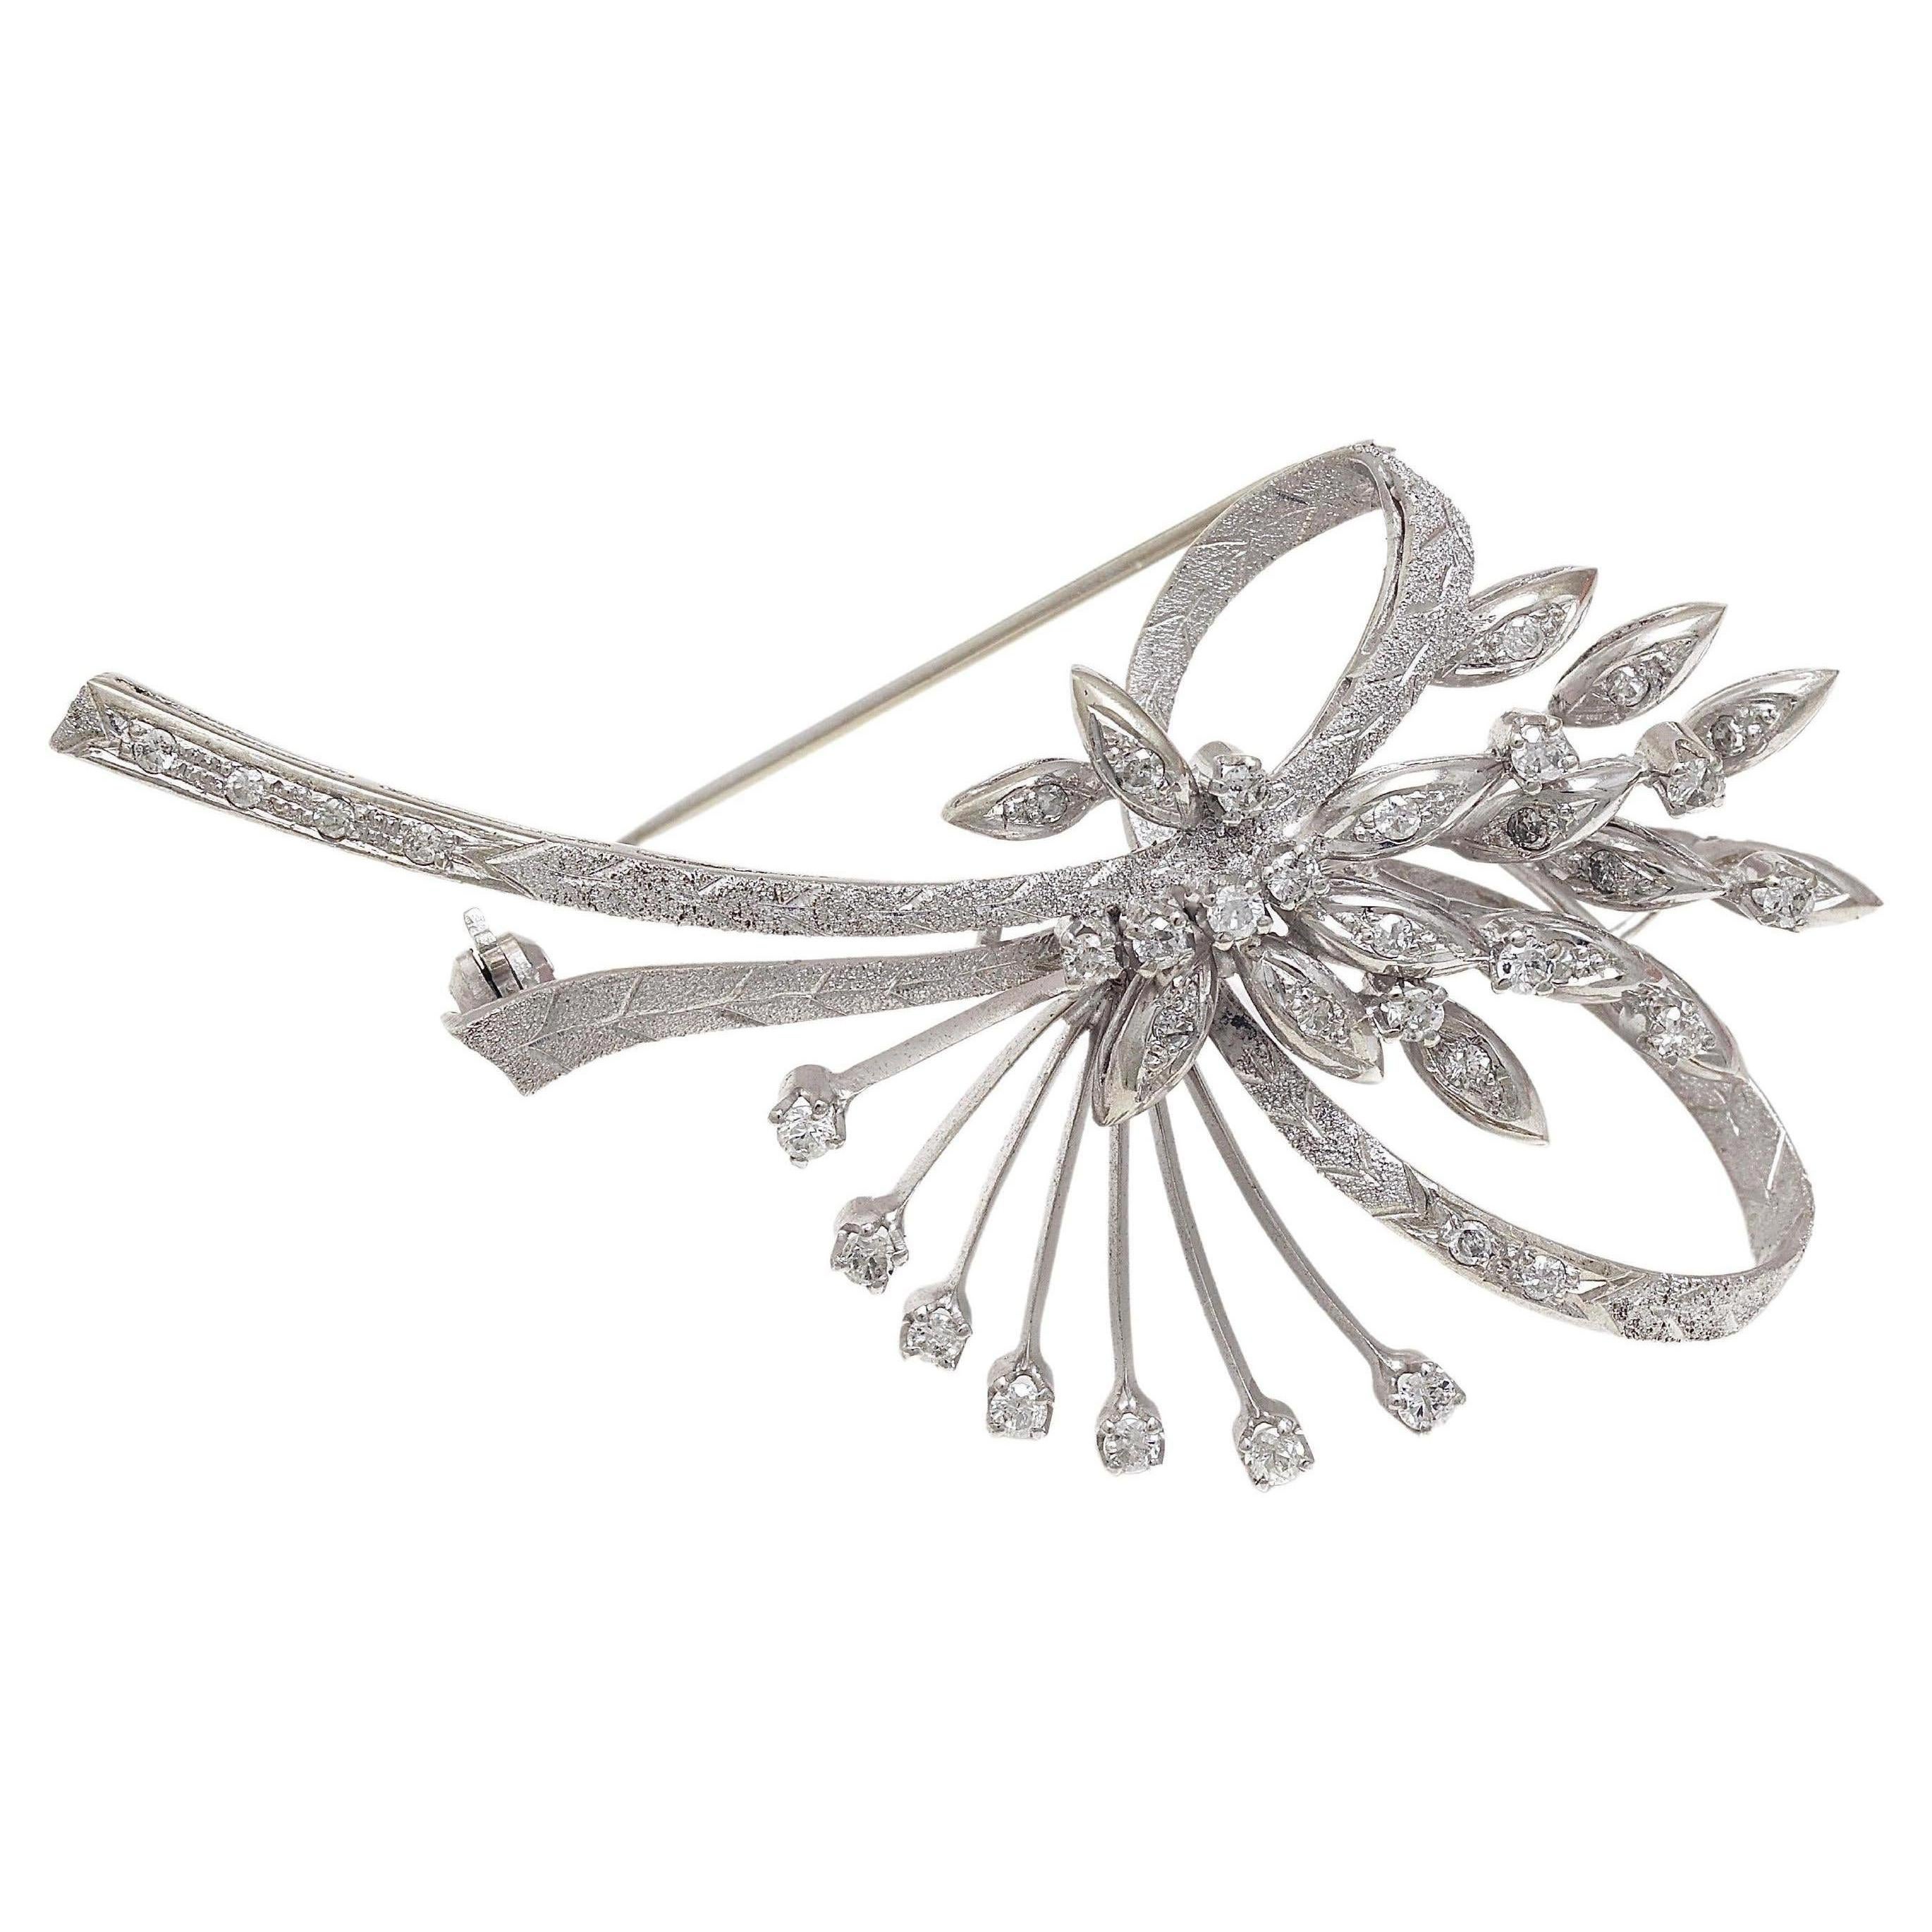  18 kt. White Gold Brooch with 1.52 ct. Brilliant Cut Diamonds For Sale